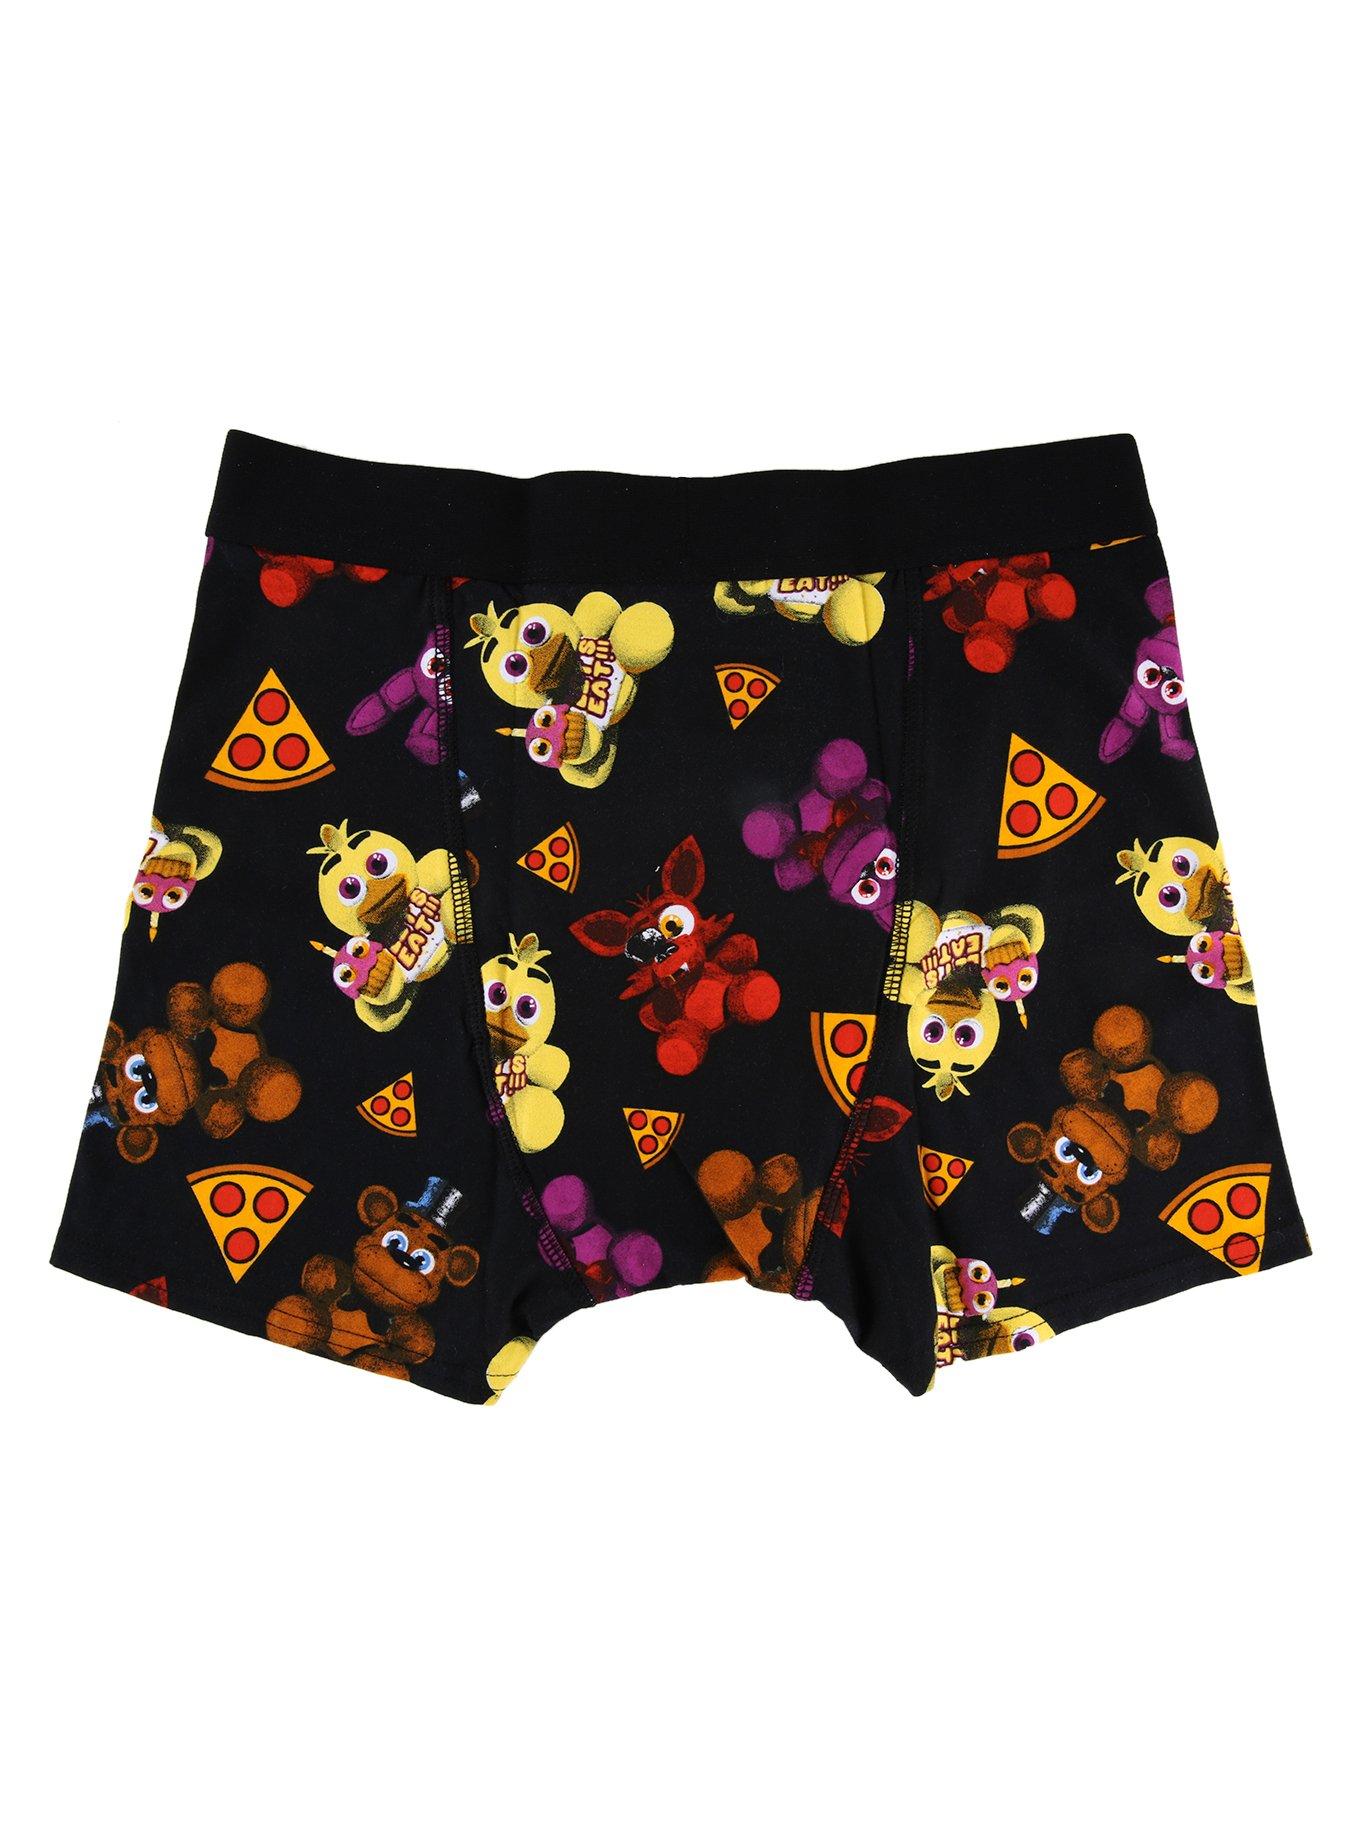 Five Nights at Freddy's 3 Pack Boys Boxer Briefs